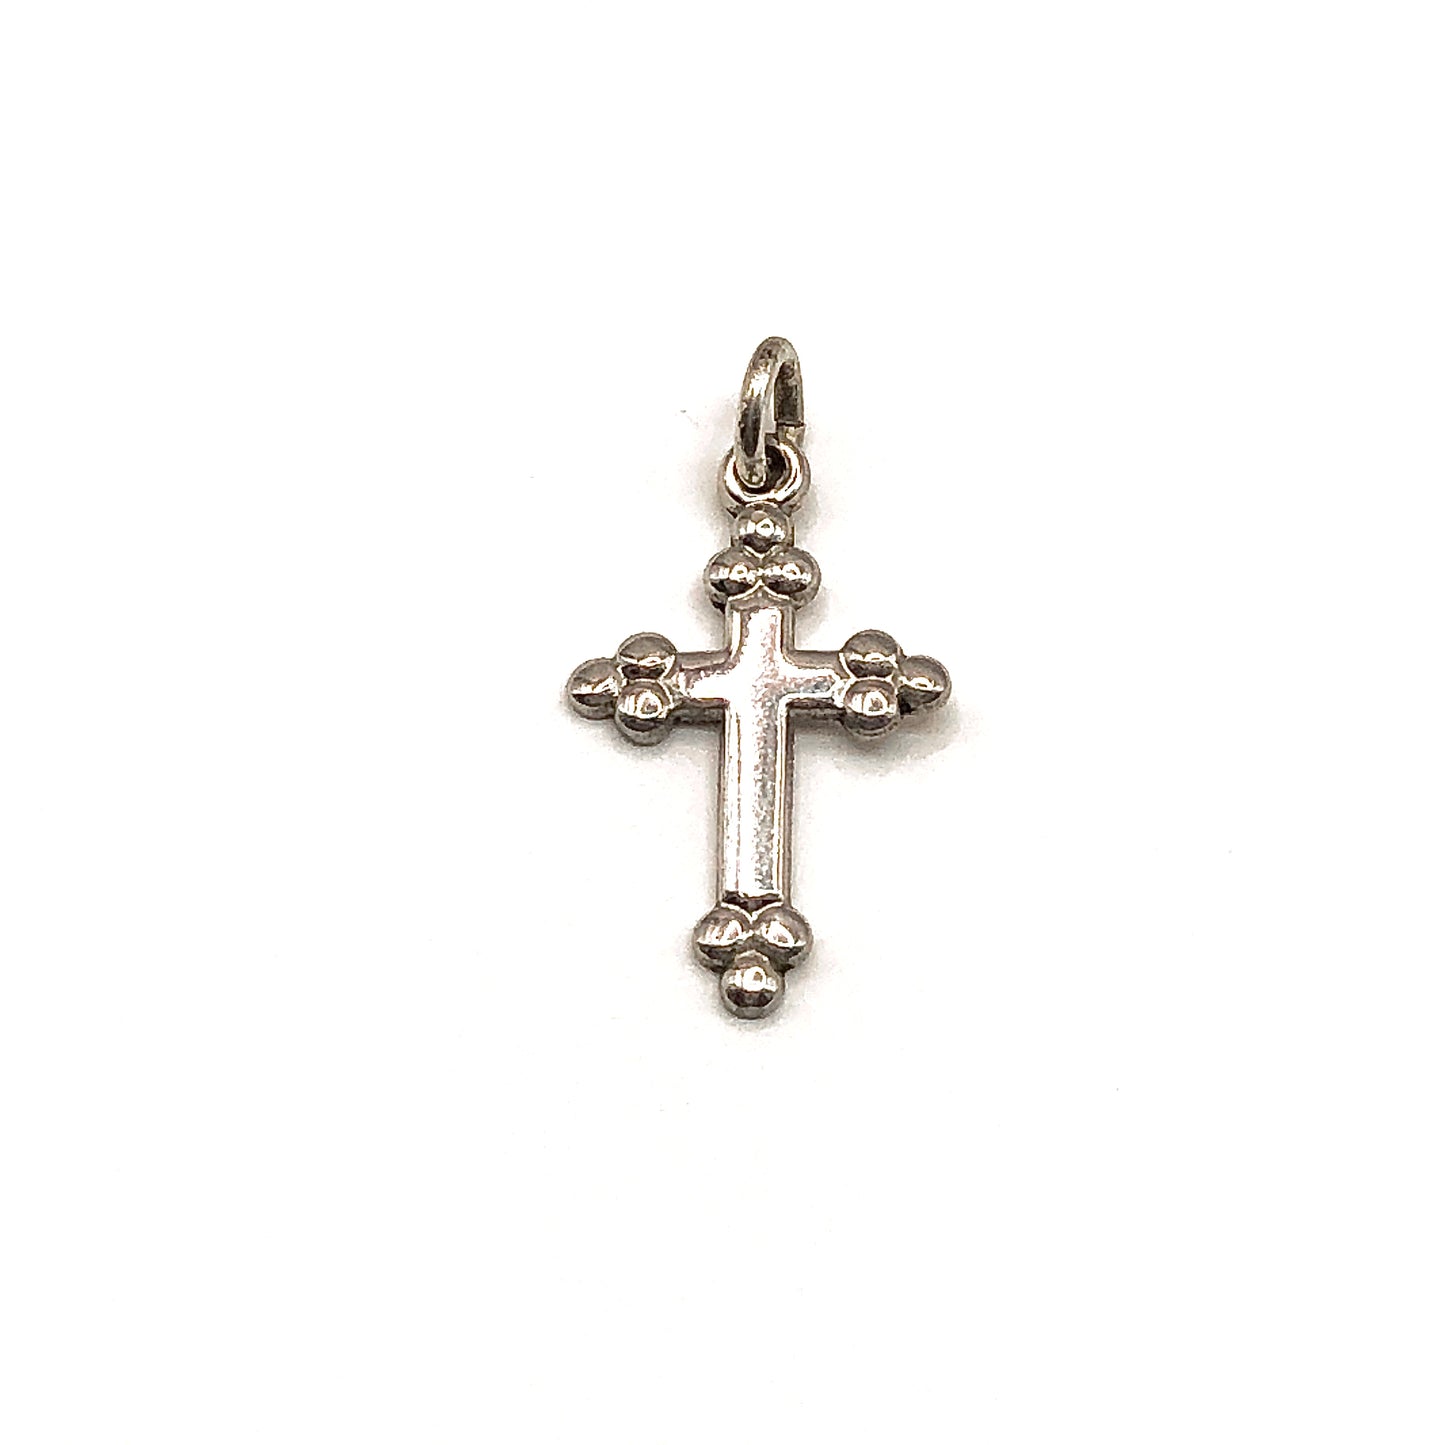 Small Childs Cross Pendant - Vintage Sterling Silver Cross Charm - Discount Estate Jewelry